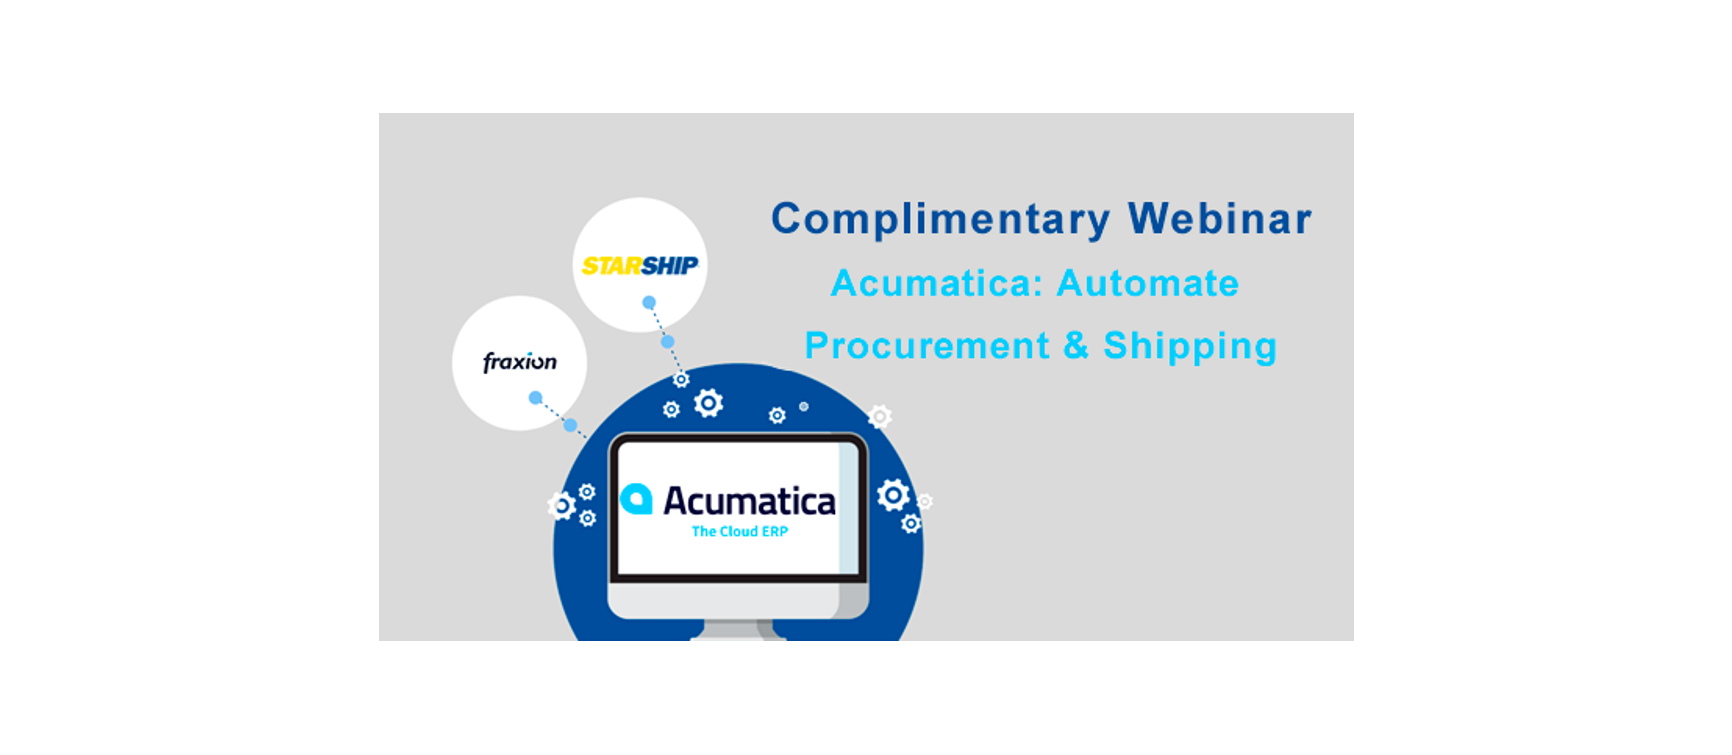 Acumatica: Automated Procurement and Shipping